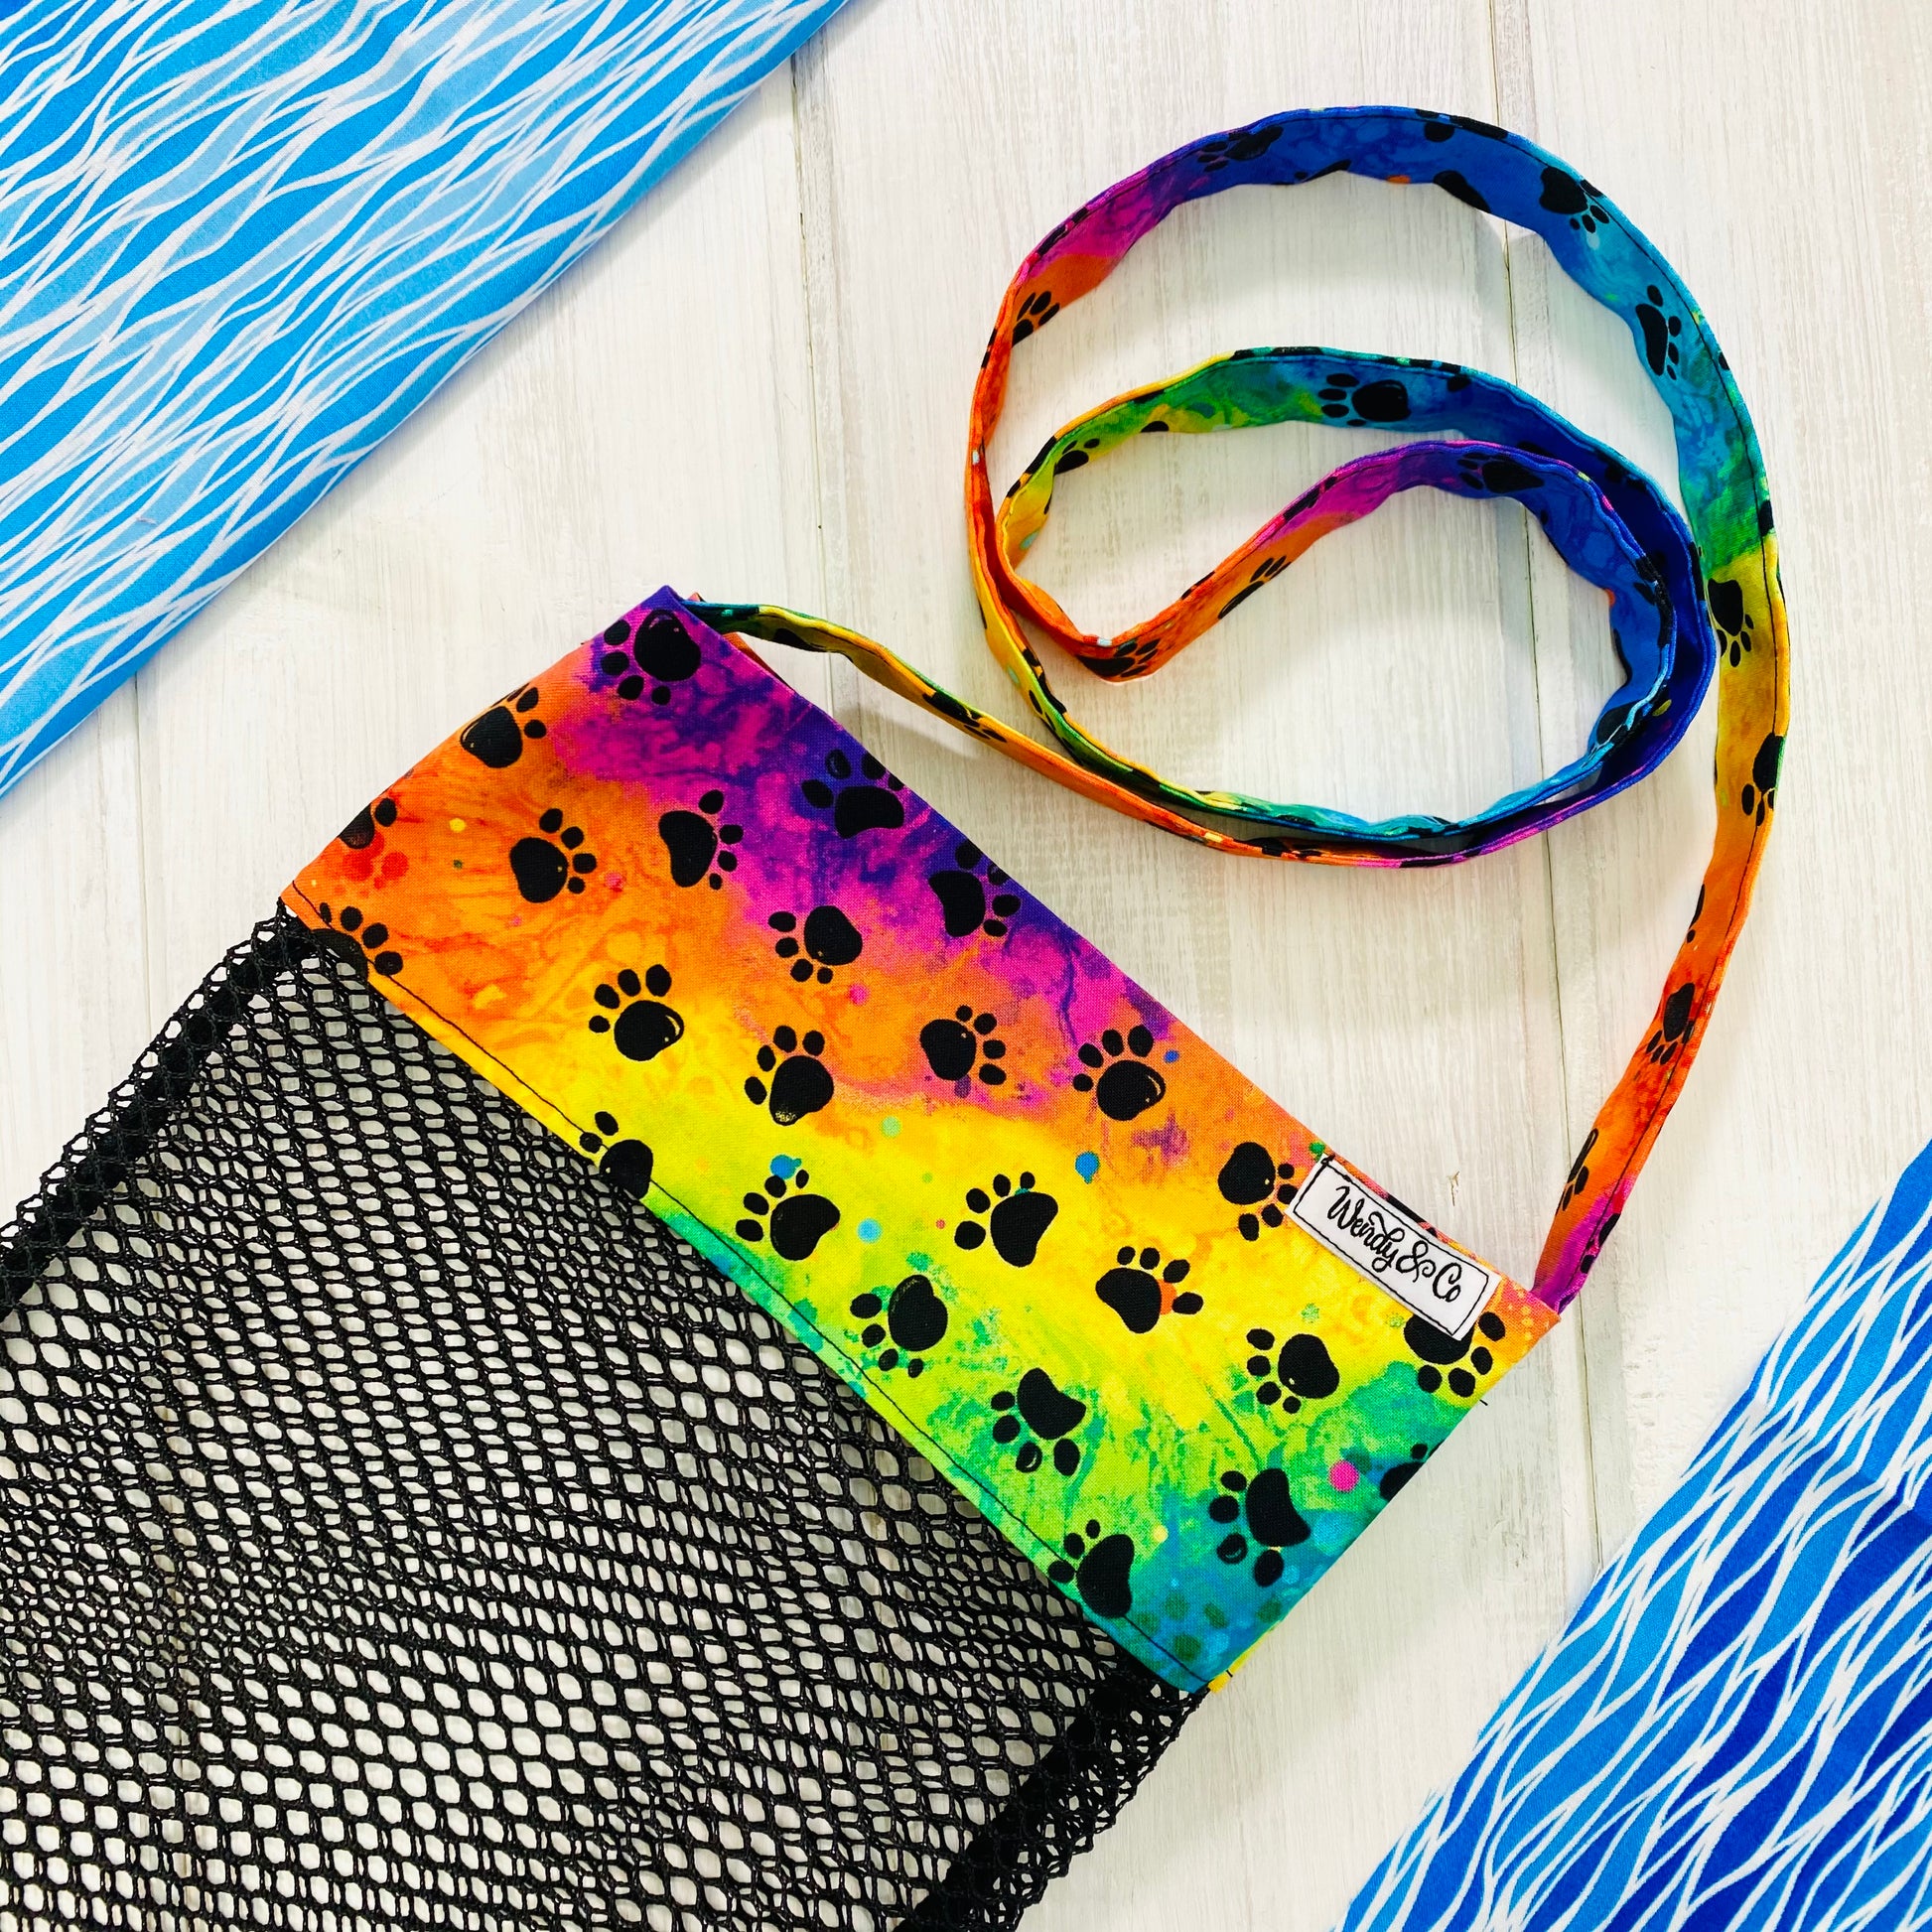 Seashell bag with mesh bottom for rinsing shells, in bright tie-dye pattern with black paw prints.